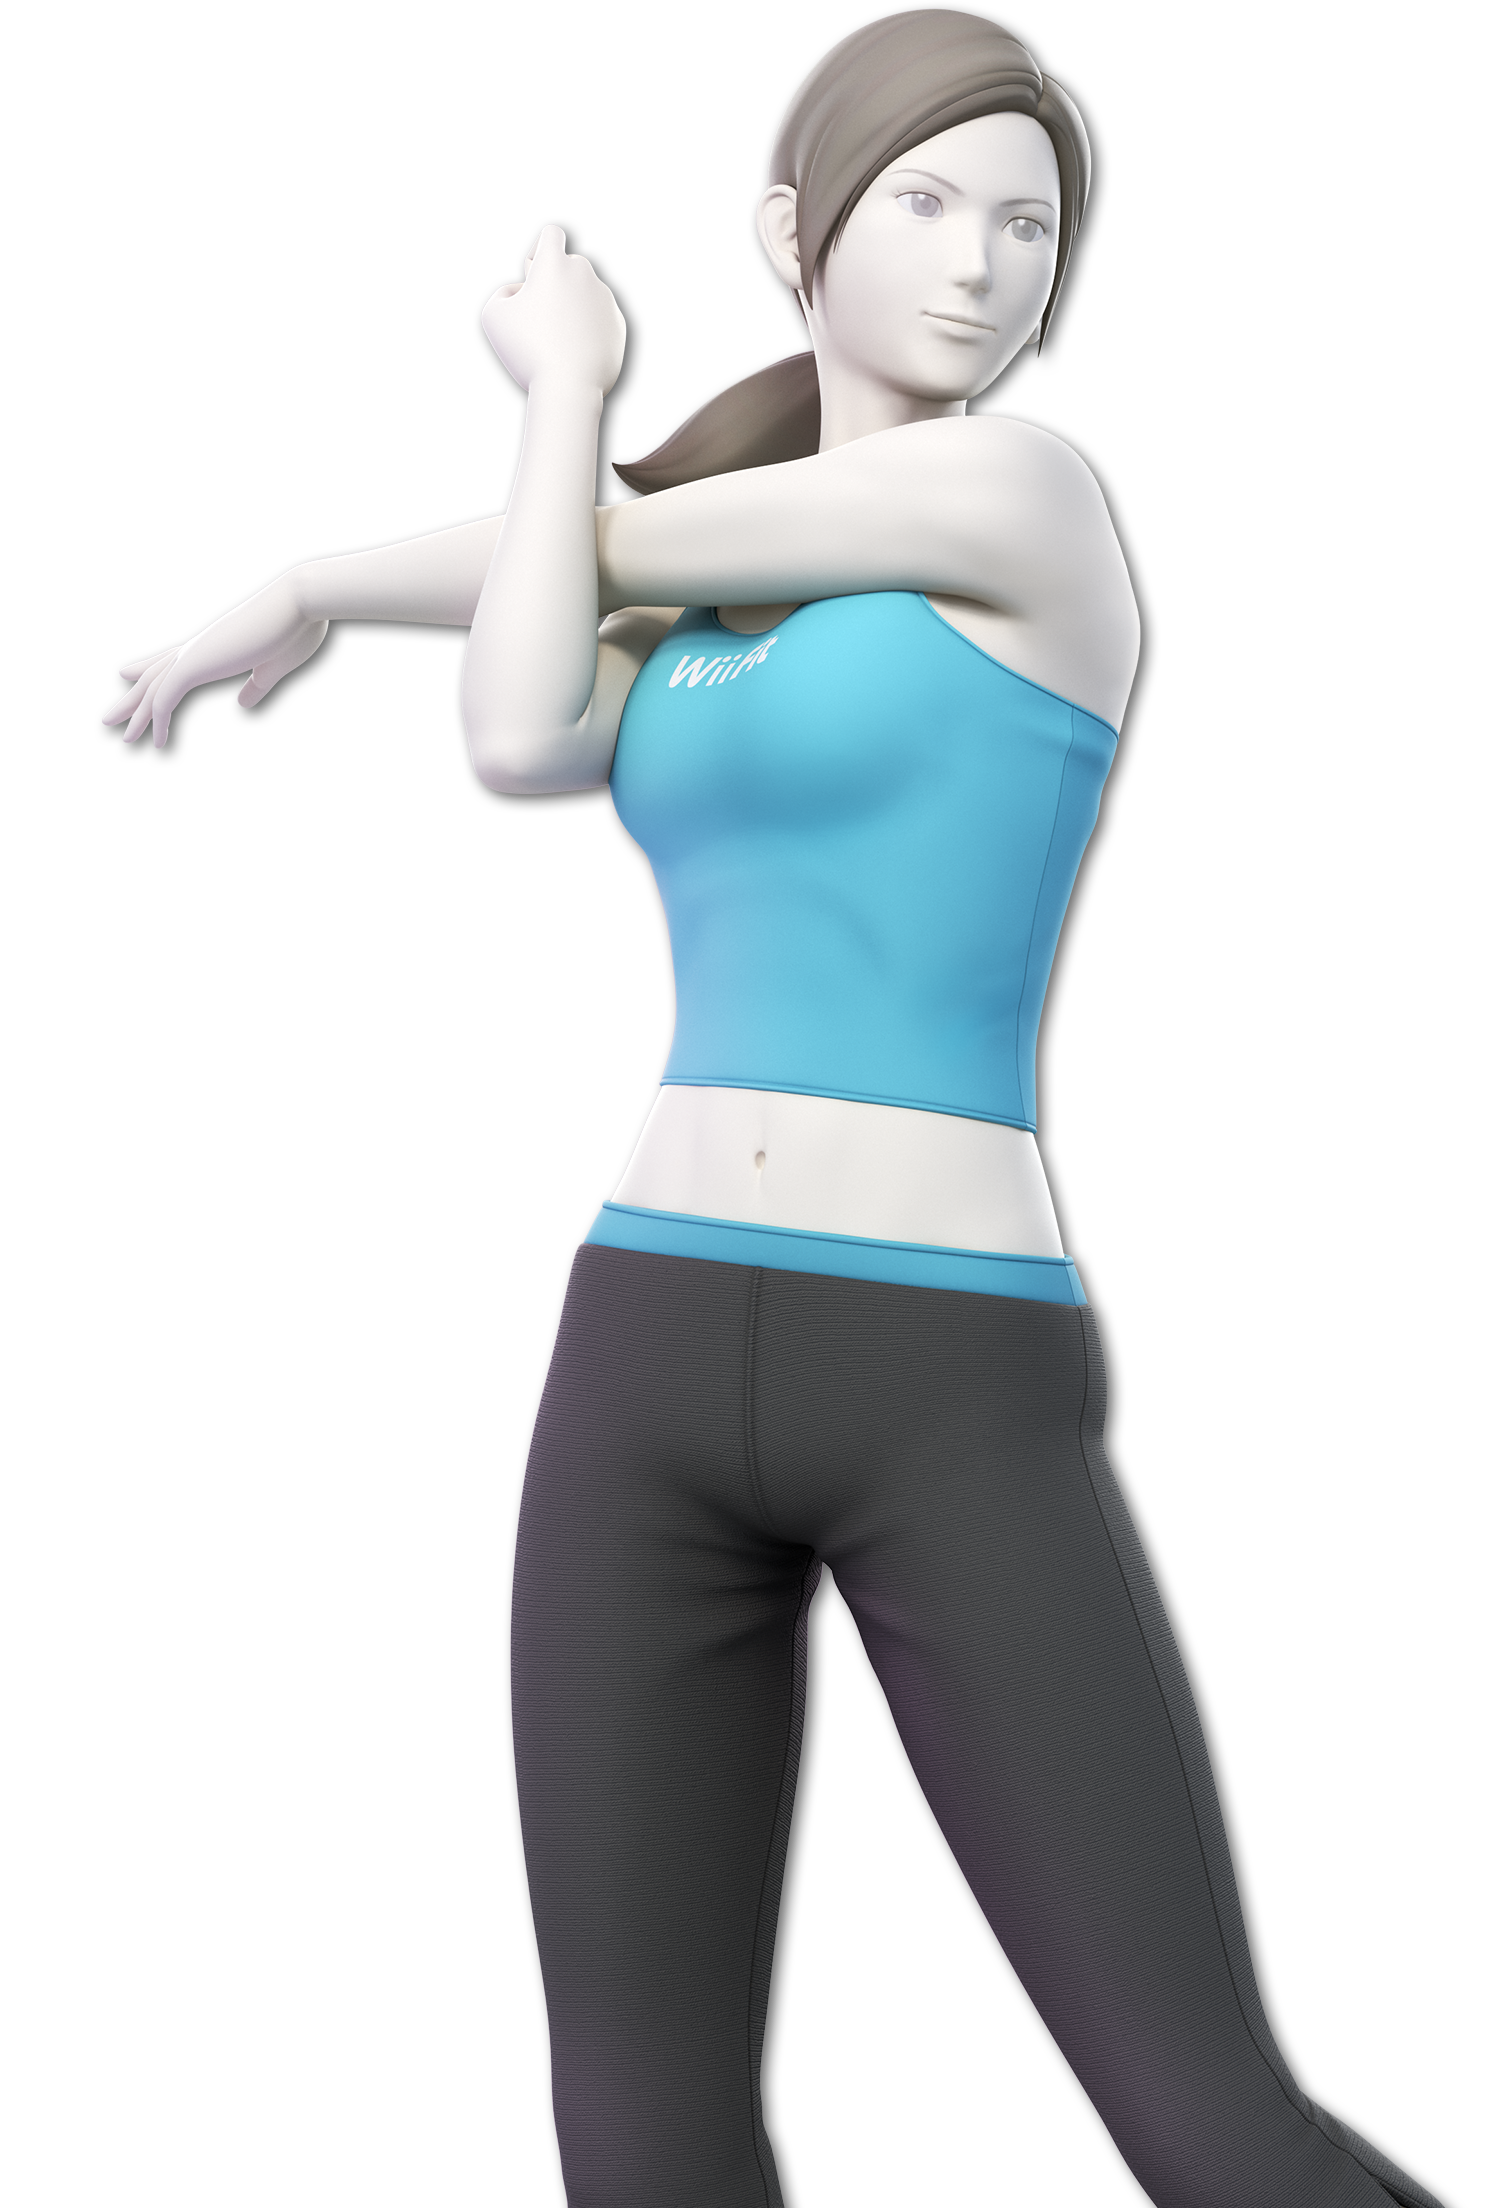 wii fit trainer and little mac